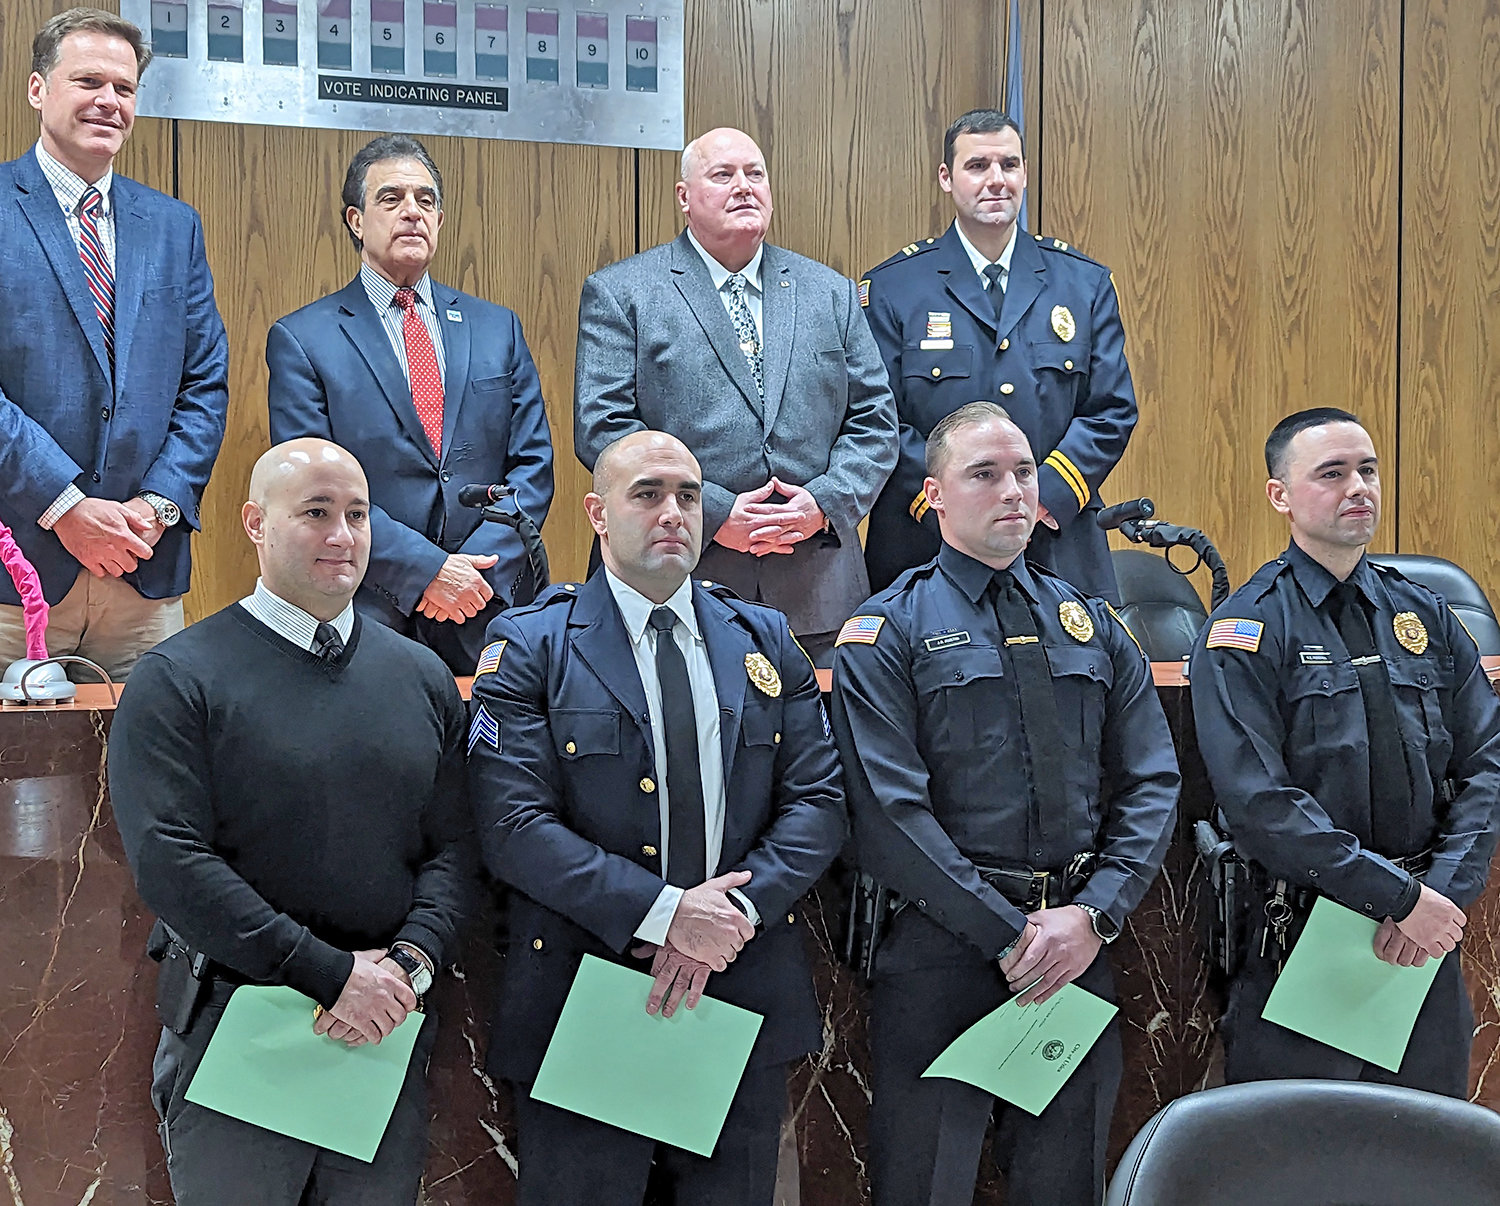 Four Utica police officers were promoted to new positions Friday morning. From left, front, Capt. Stanley Fernalld, Lt. Michael Curley, Sgt. Joshua Austin and Sgt. Kyle Piersall. In back are, from left, Deputy Chief Edward Noonan, Utica Mayor Robert Palmieri, Chief Mark Williams and Capt. Brian Bansner.